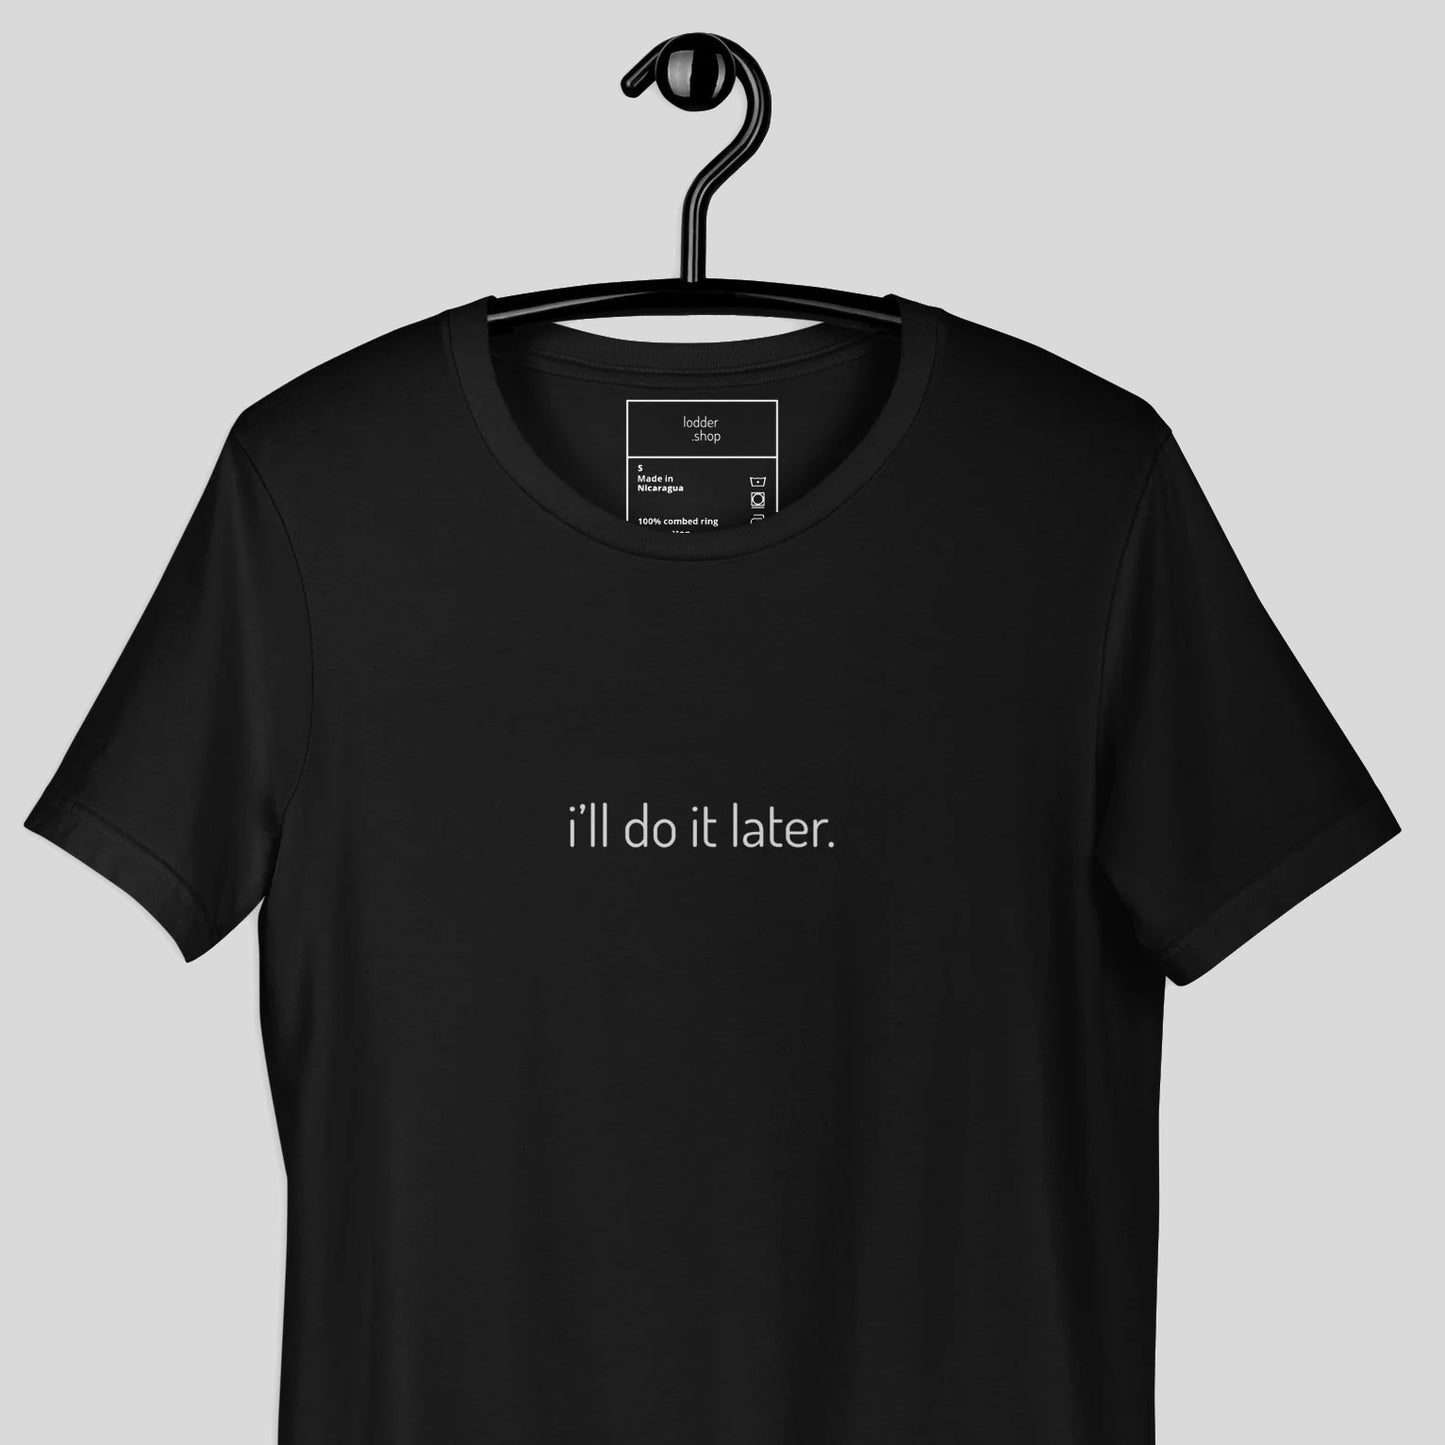 i'll do it later t-shirt